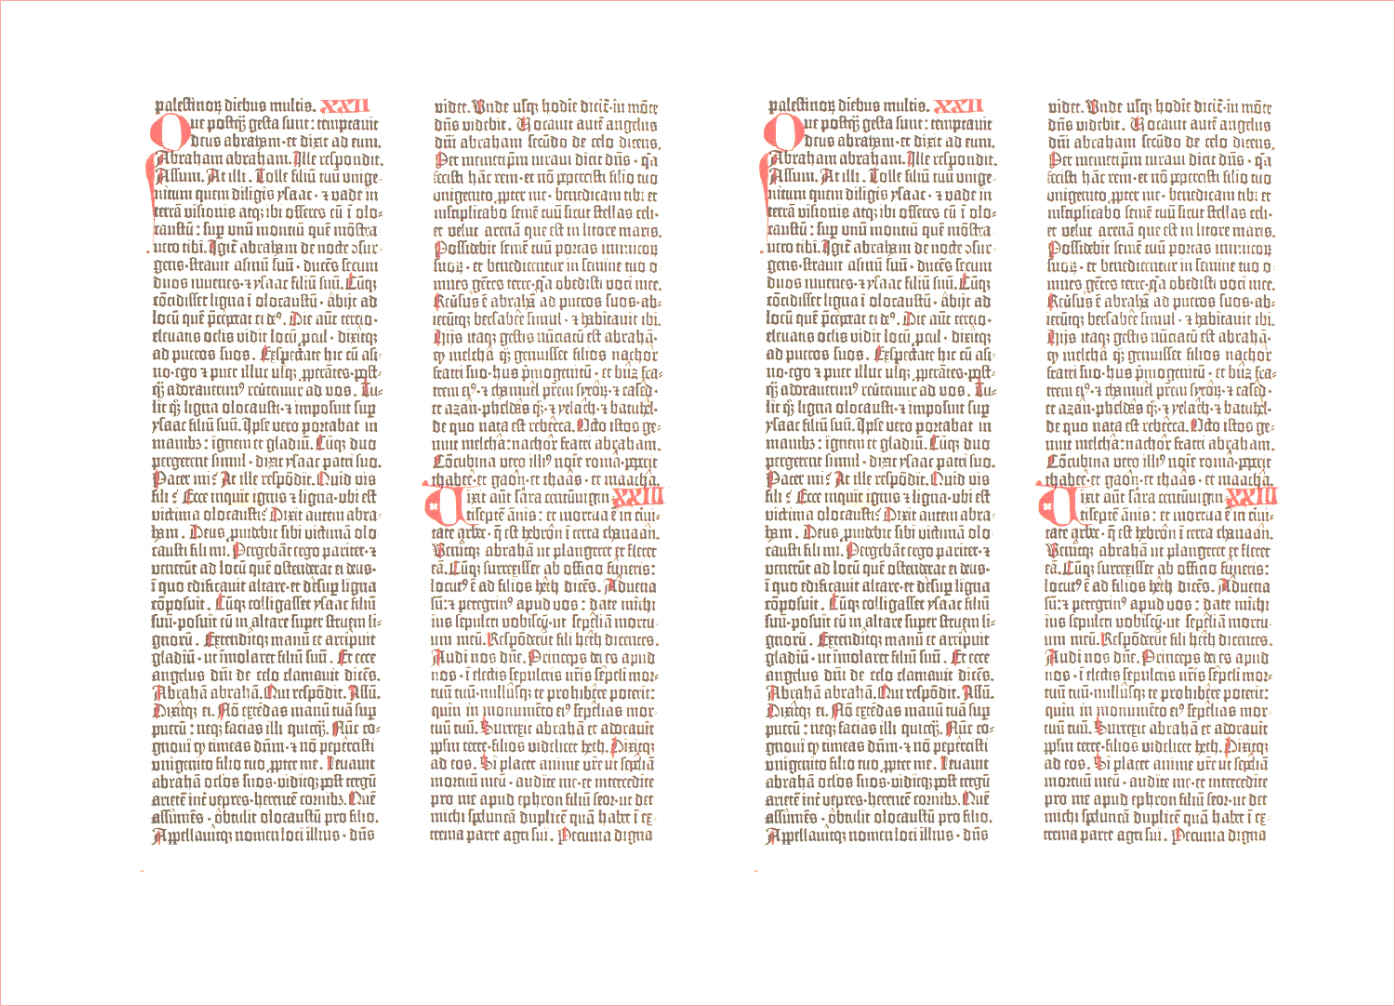 The first edition of the Gutenberg Bible (~1454) used two printing passes, with the second for rubrication, but switched to a single pass & hand rubrication. (Rubrication was often used on ‘caput’/pilcrow symbols to denote paragraphs and other separations inline; a fun homage is Dowling & Duncan’s exhibit on the Charter of the Forest.)